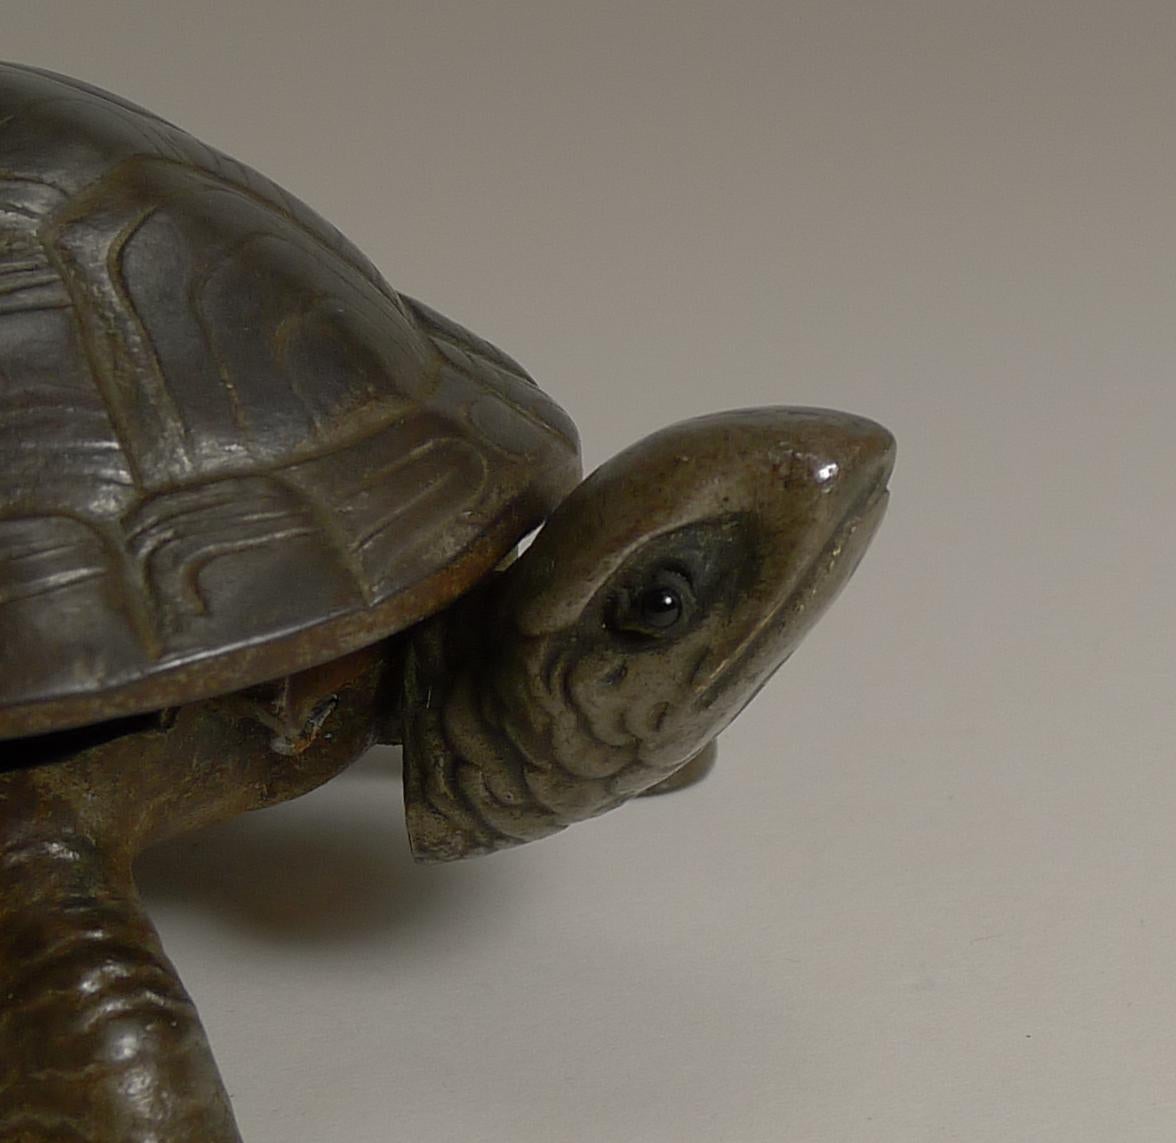 Always sought-after and harder to find these days, this is a genuine antique German novelty counter bell in the from of a tortoise.

This example is unpolished with a good natural antique patina.

The bell is mechanical and when wound up from